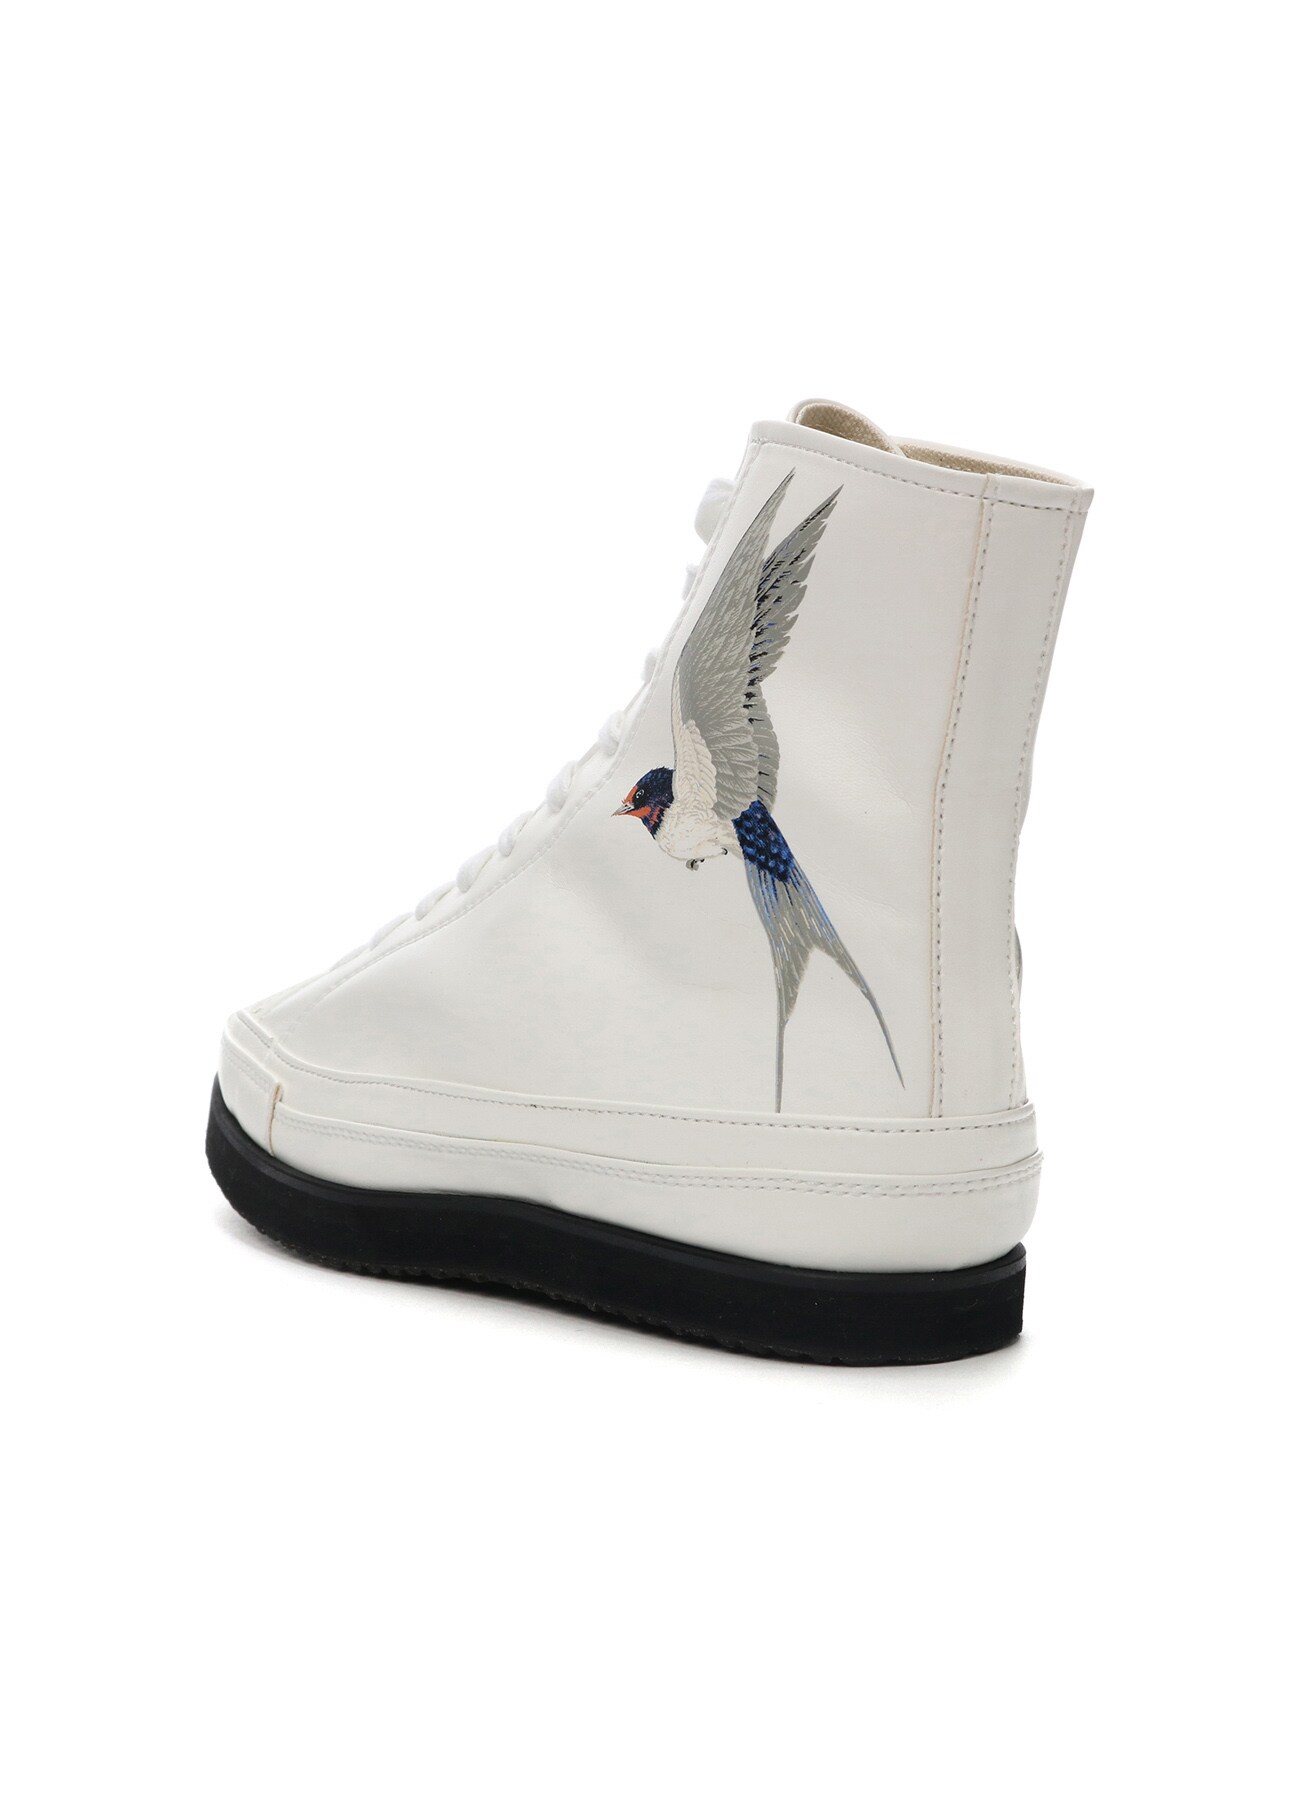 SWALLOW PRINT FAKE LEATHER HIGH TOP SNEAKER